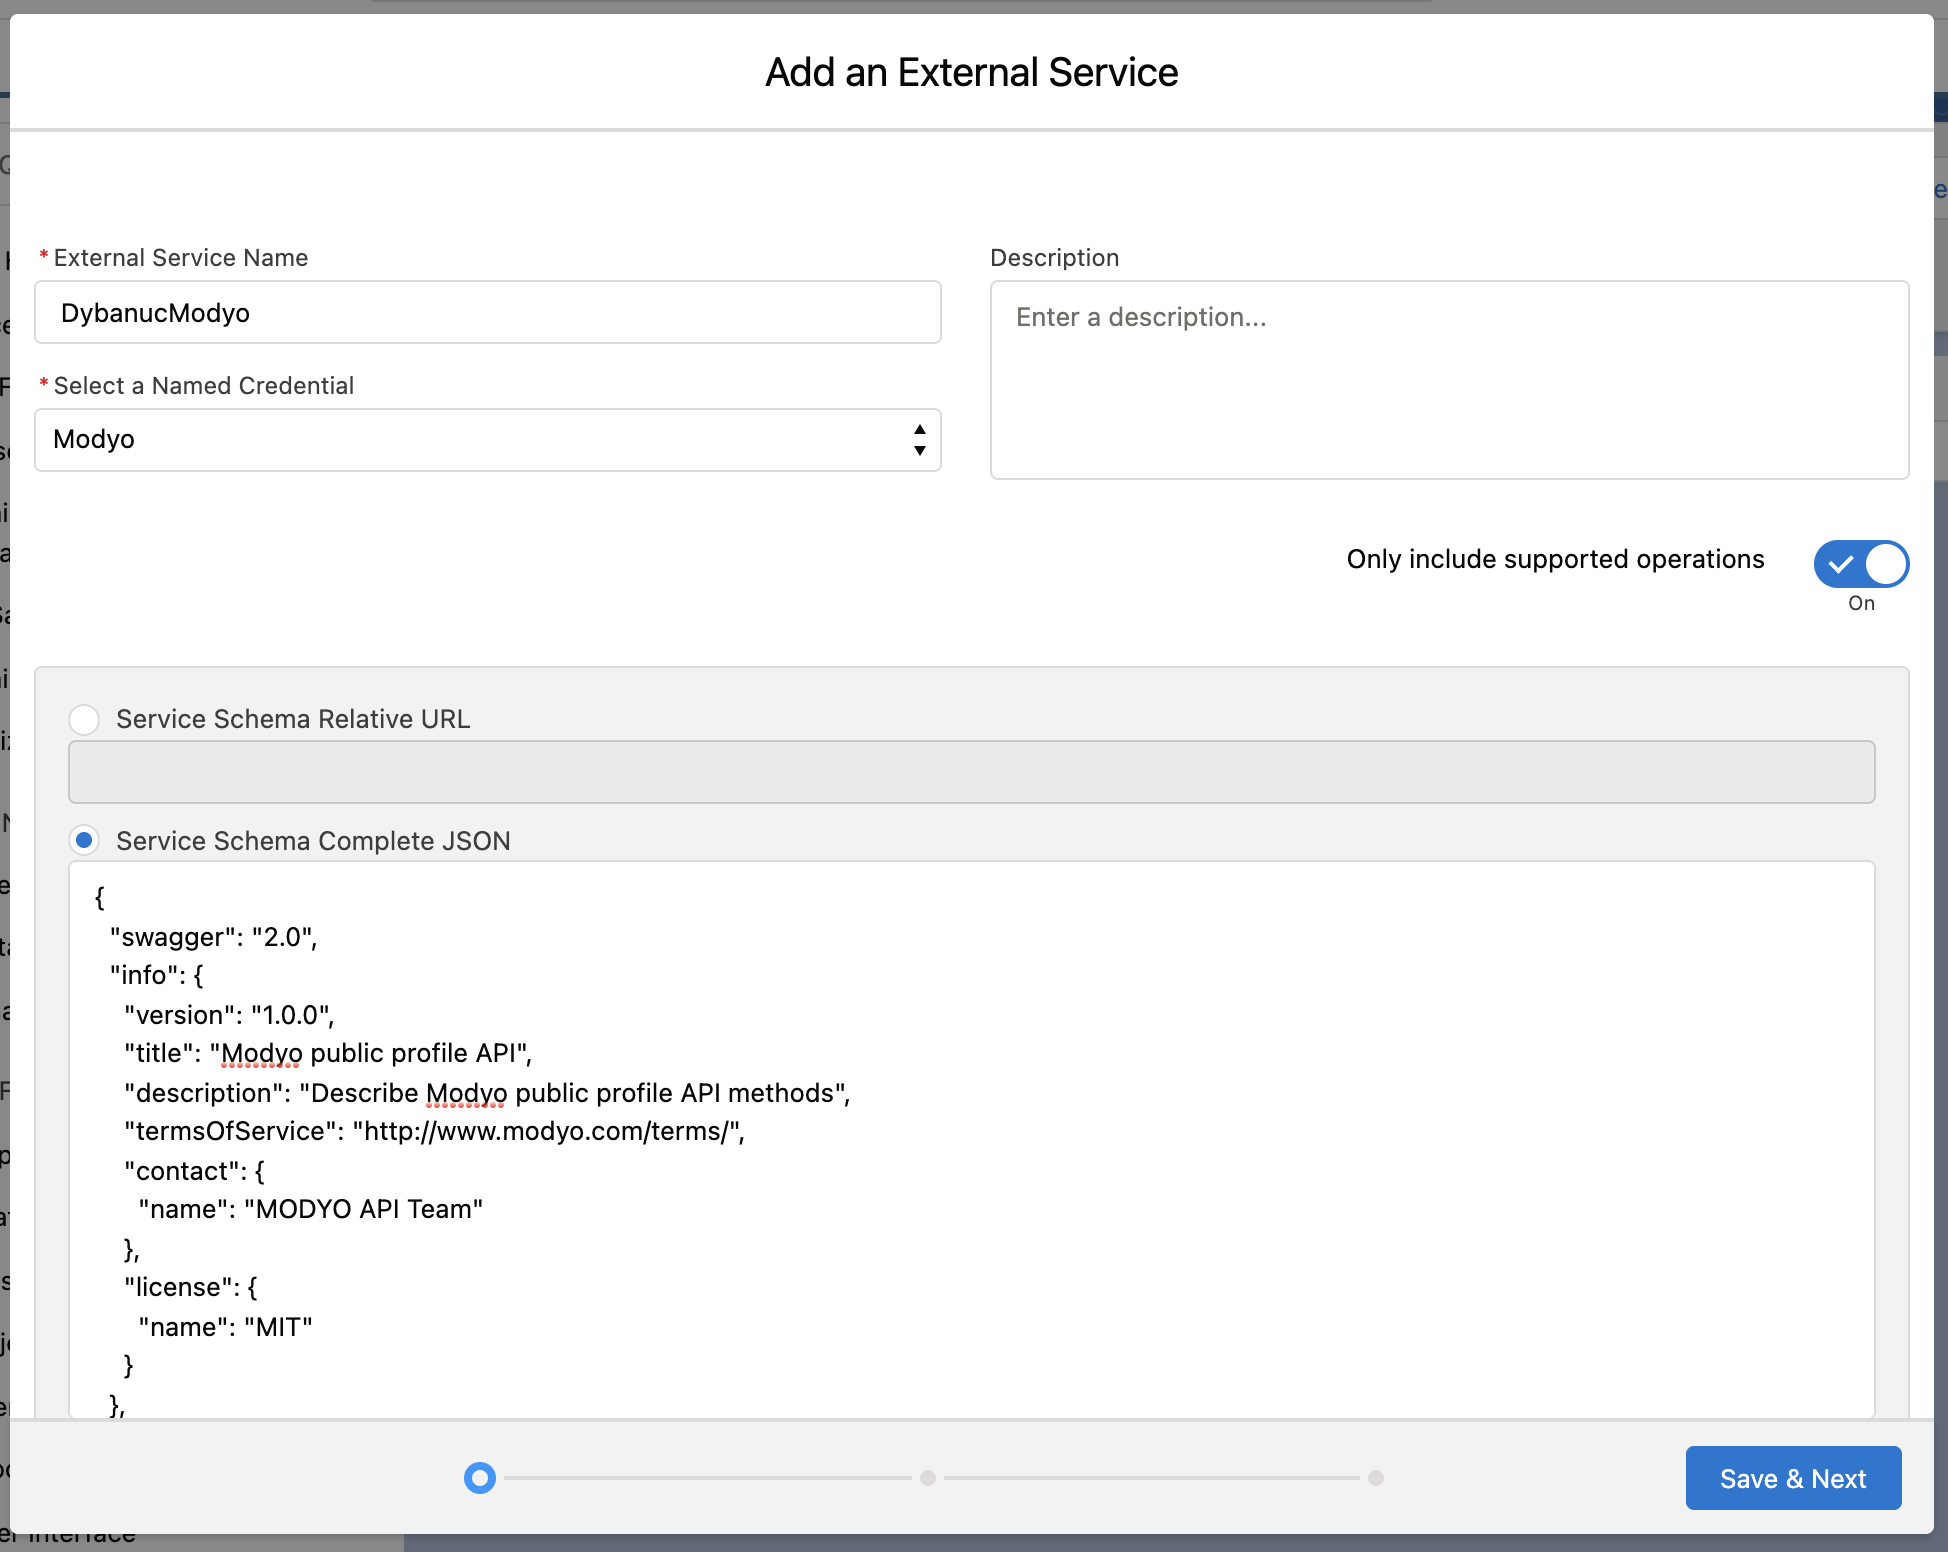 Image with Add an External Service in Salesforce.